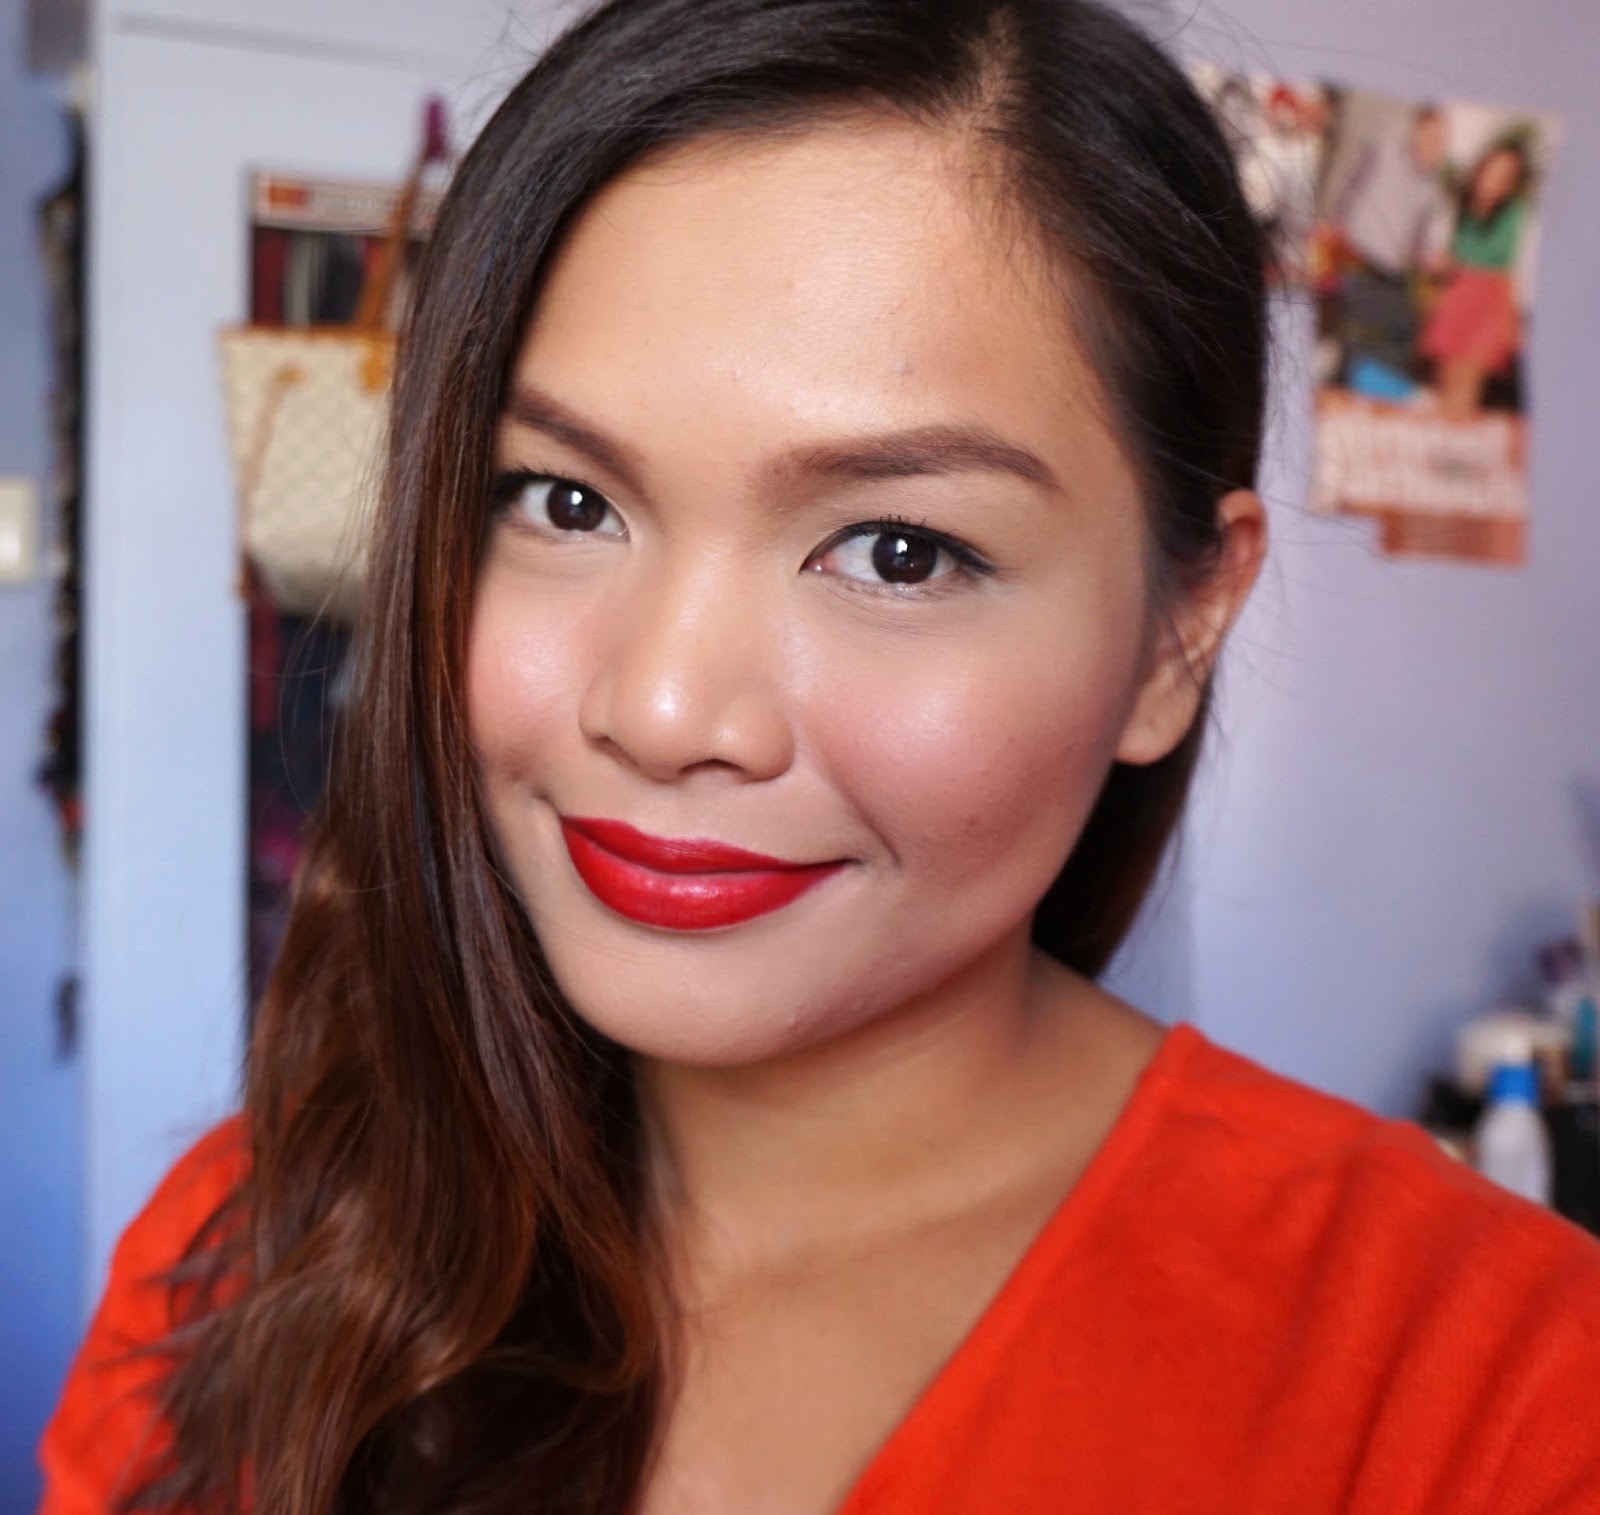 Bobbi Brown Art Stick in Harlow Red Review + Swatches | The Beauty Junkee